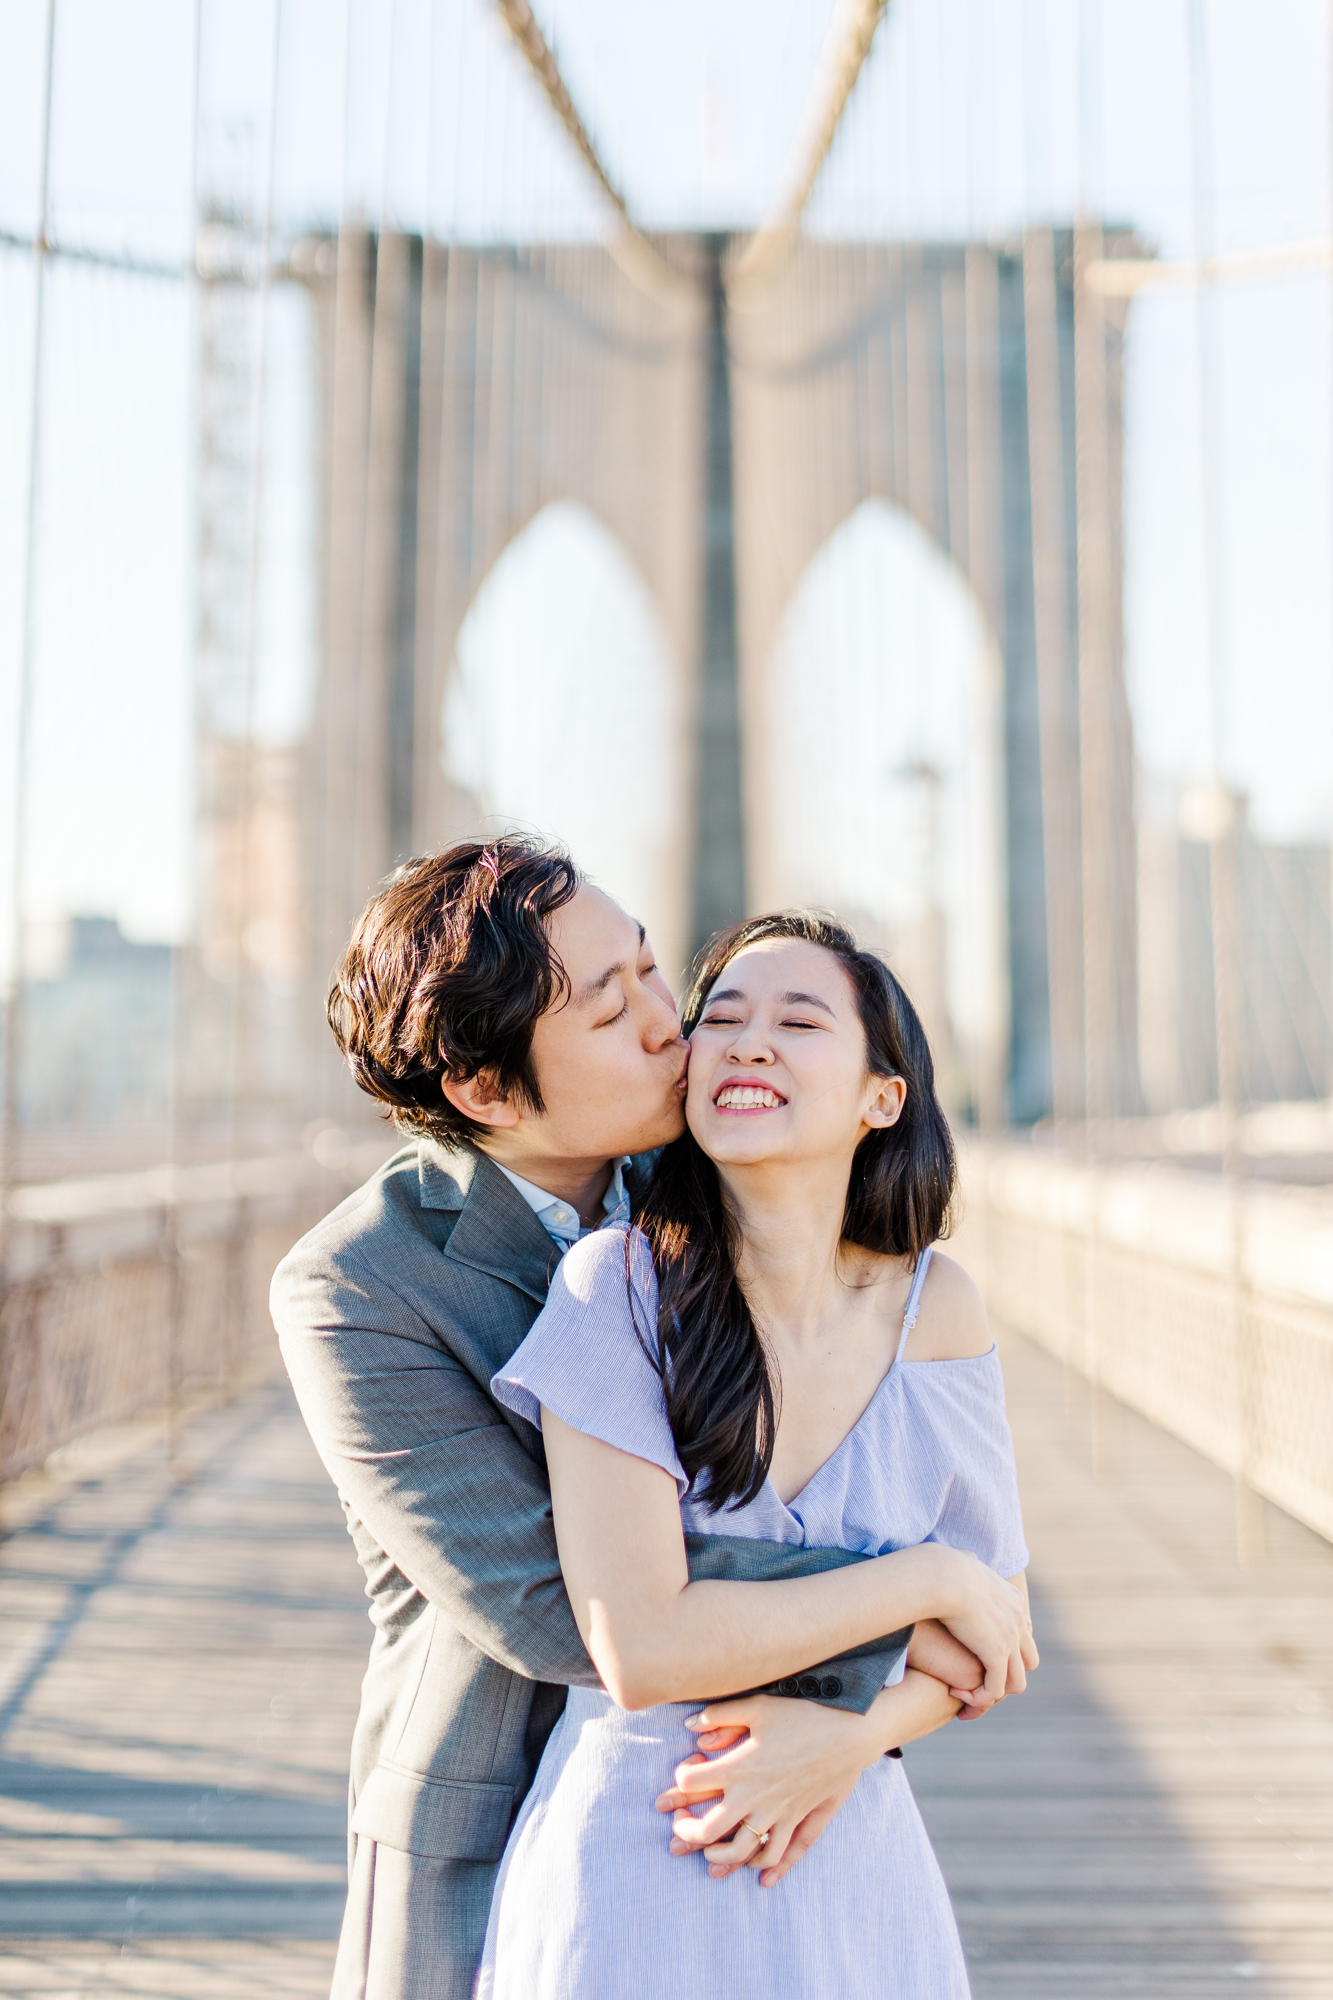 Intimate Engagement Photos in New York